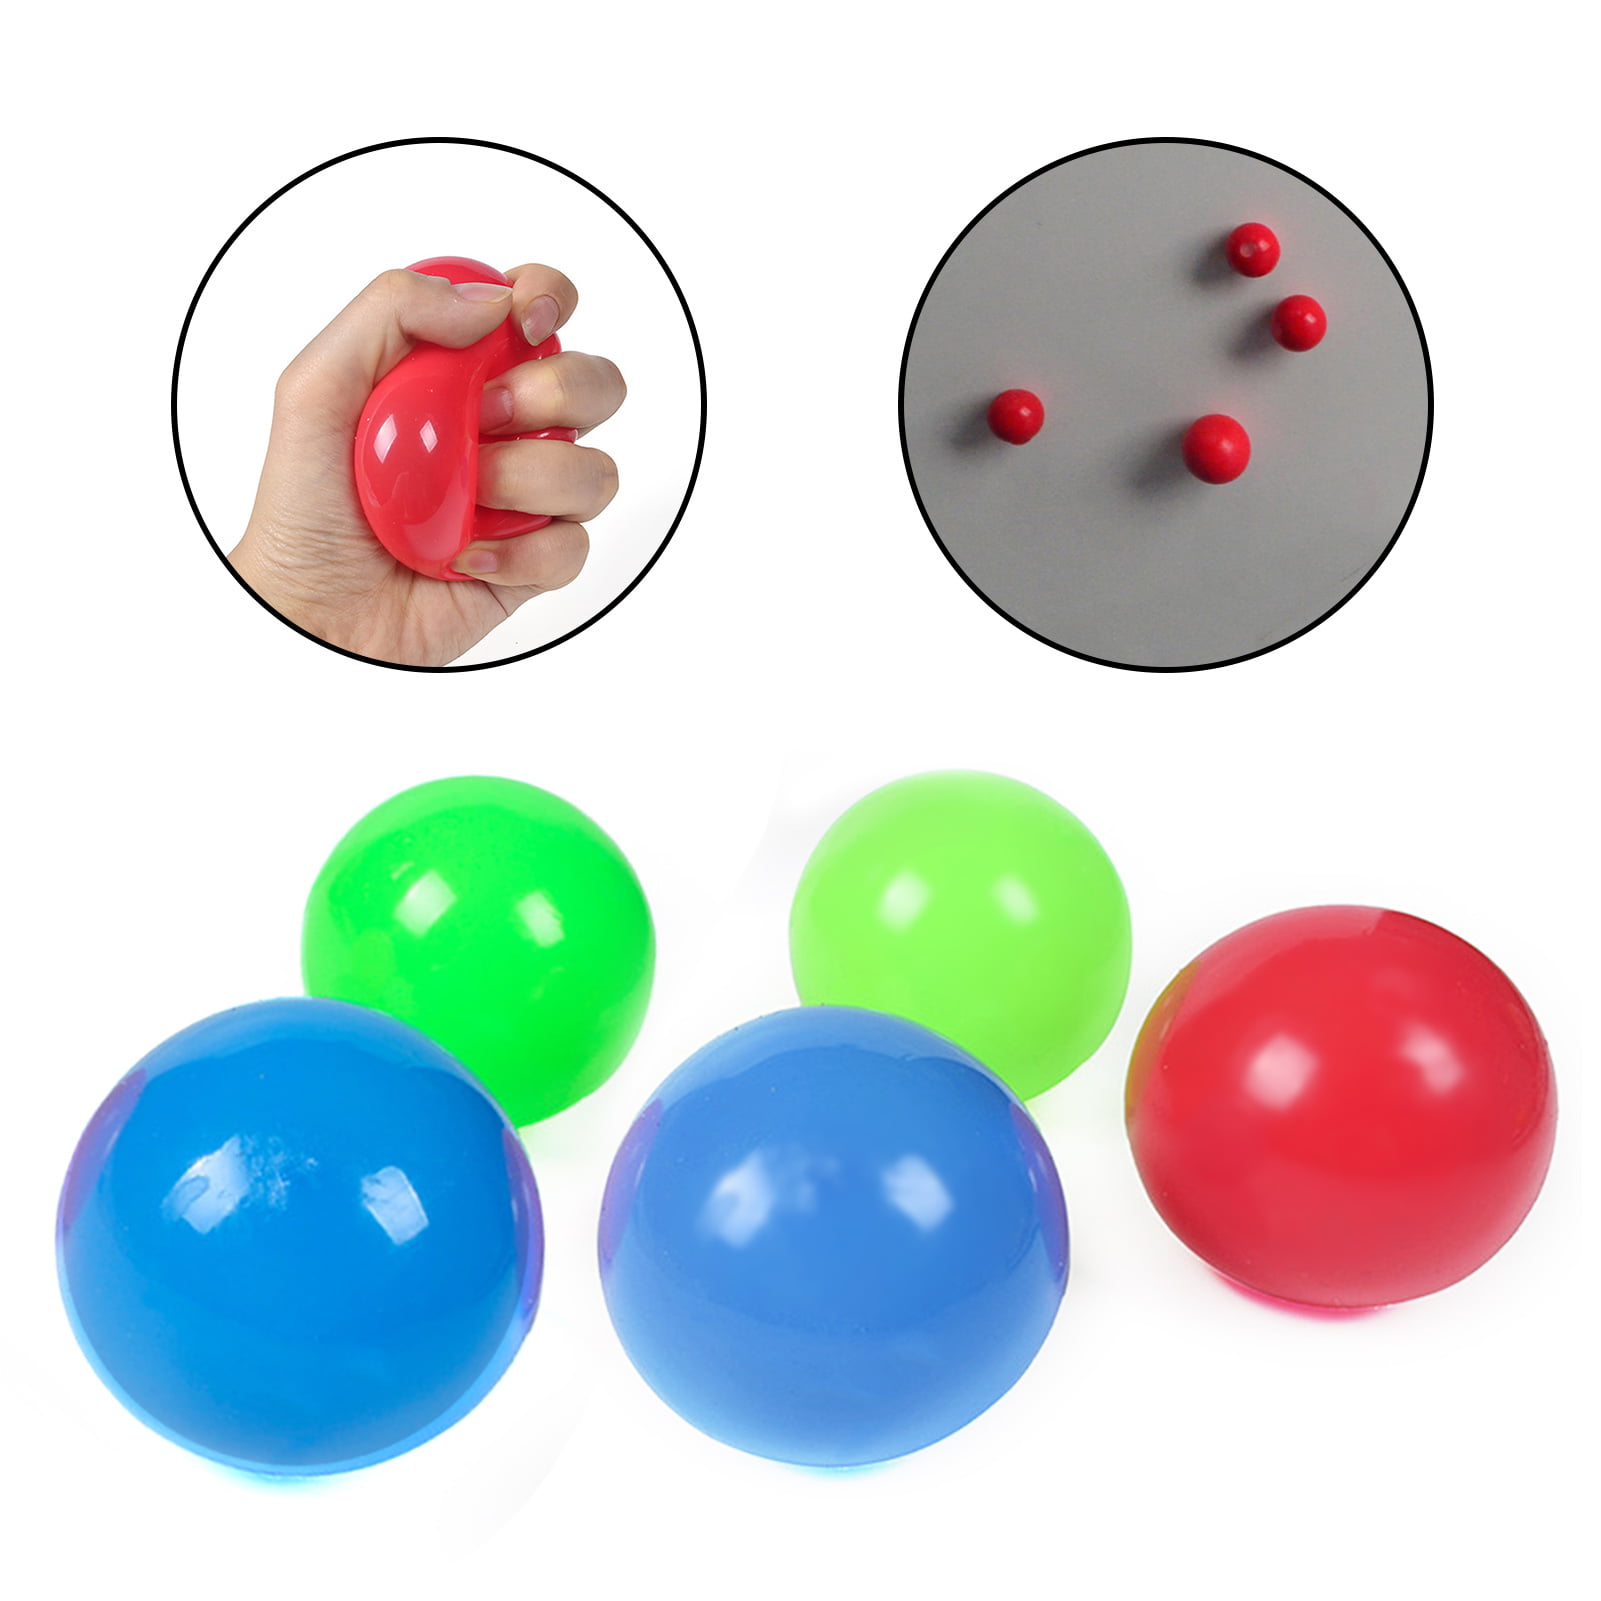 Details about   8 Pcs Sticky Balls Luminescent Ball Decompression Stress Relief Adults Kid Toys 